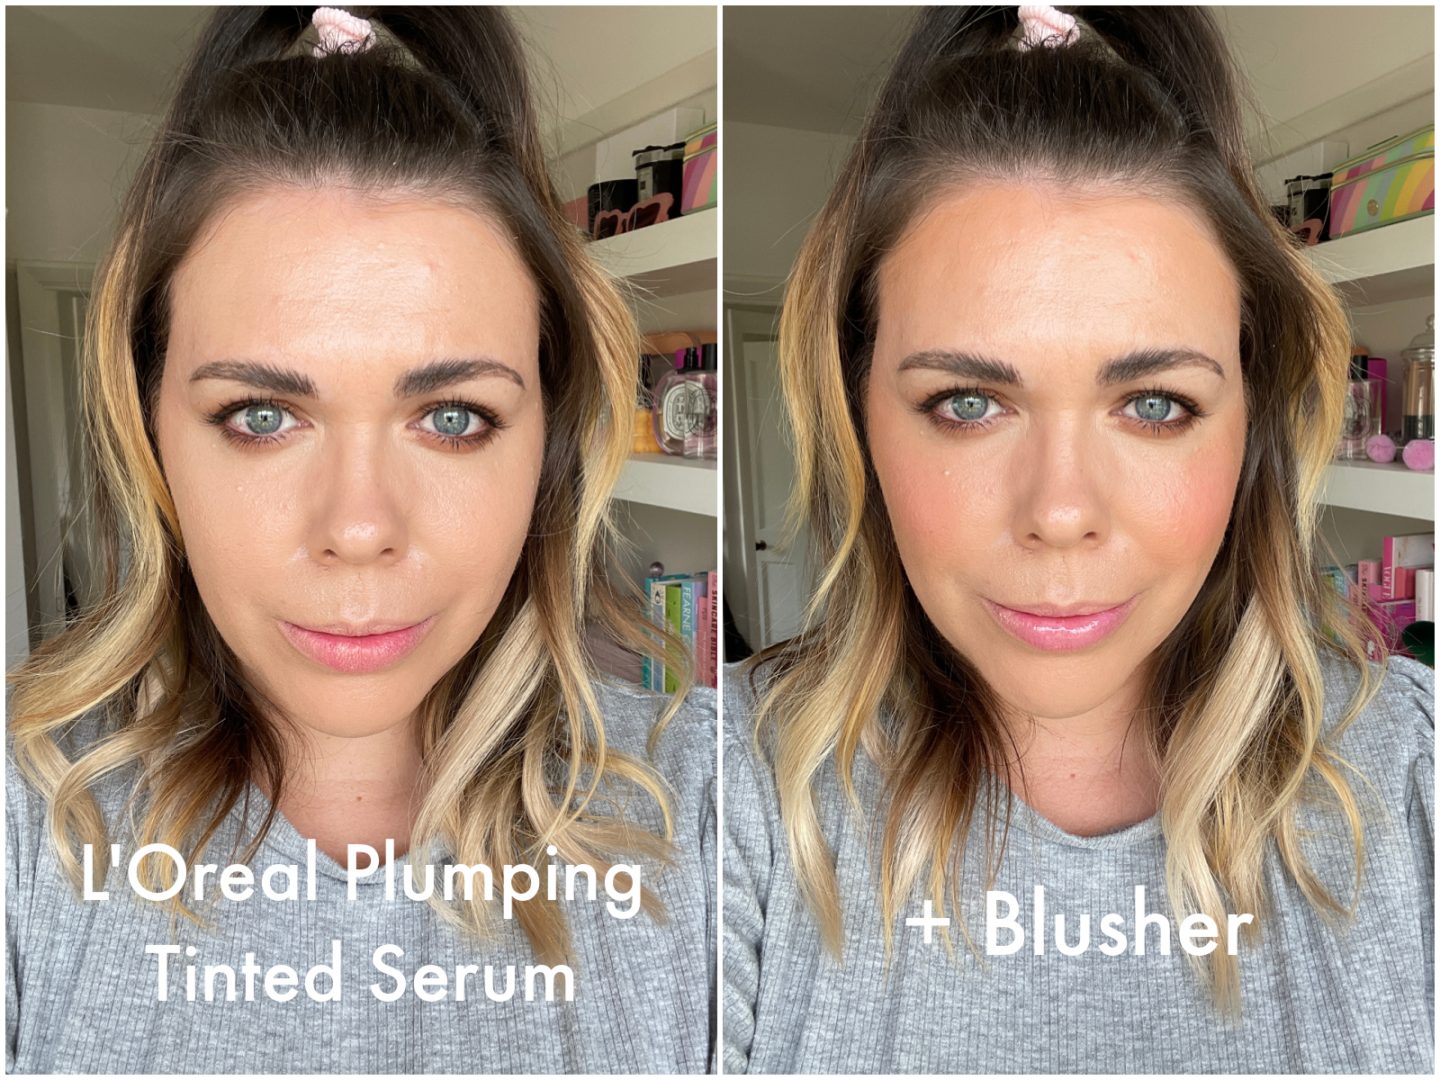 L'Oreal True Match Plumping Tinted Serum review before and after